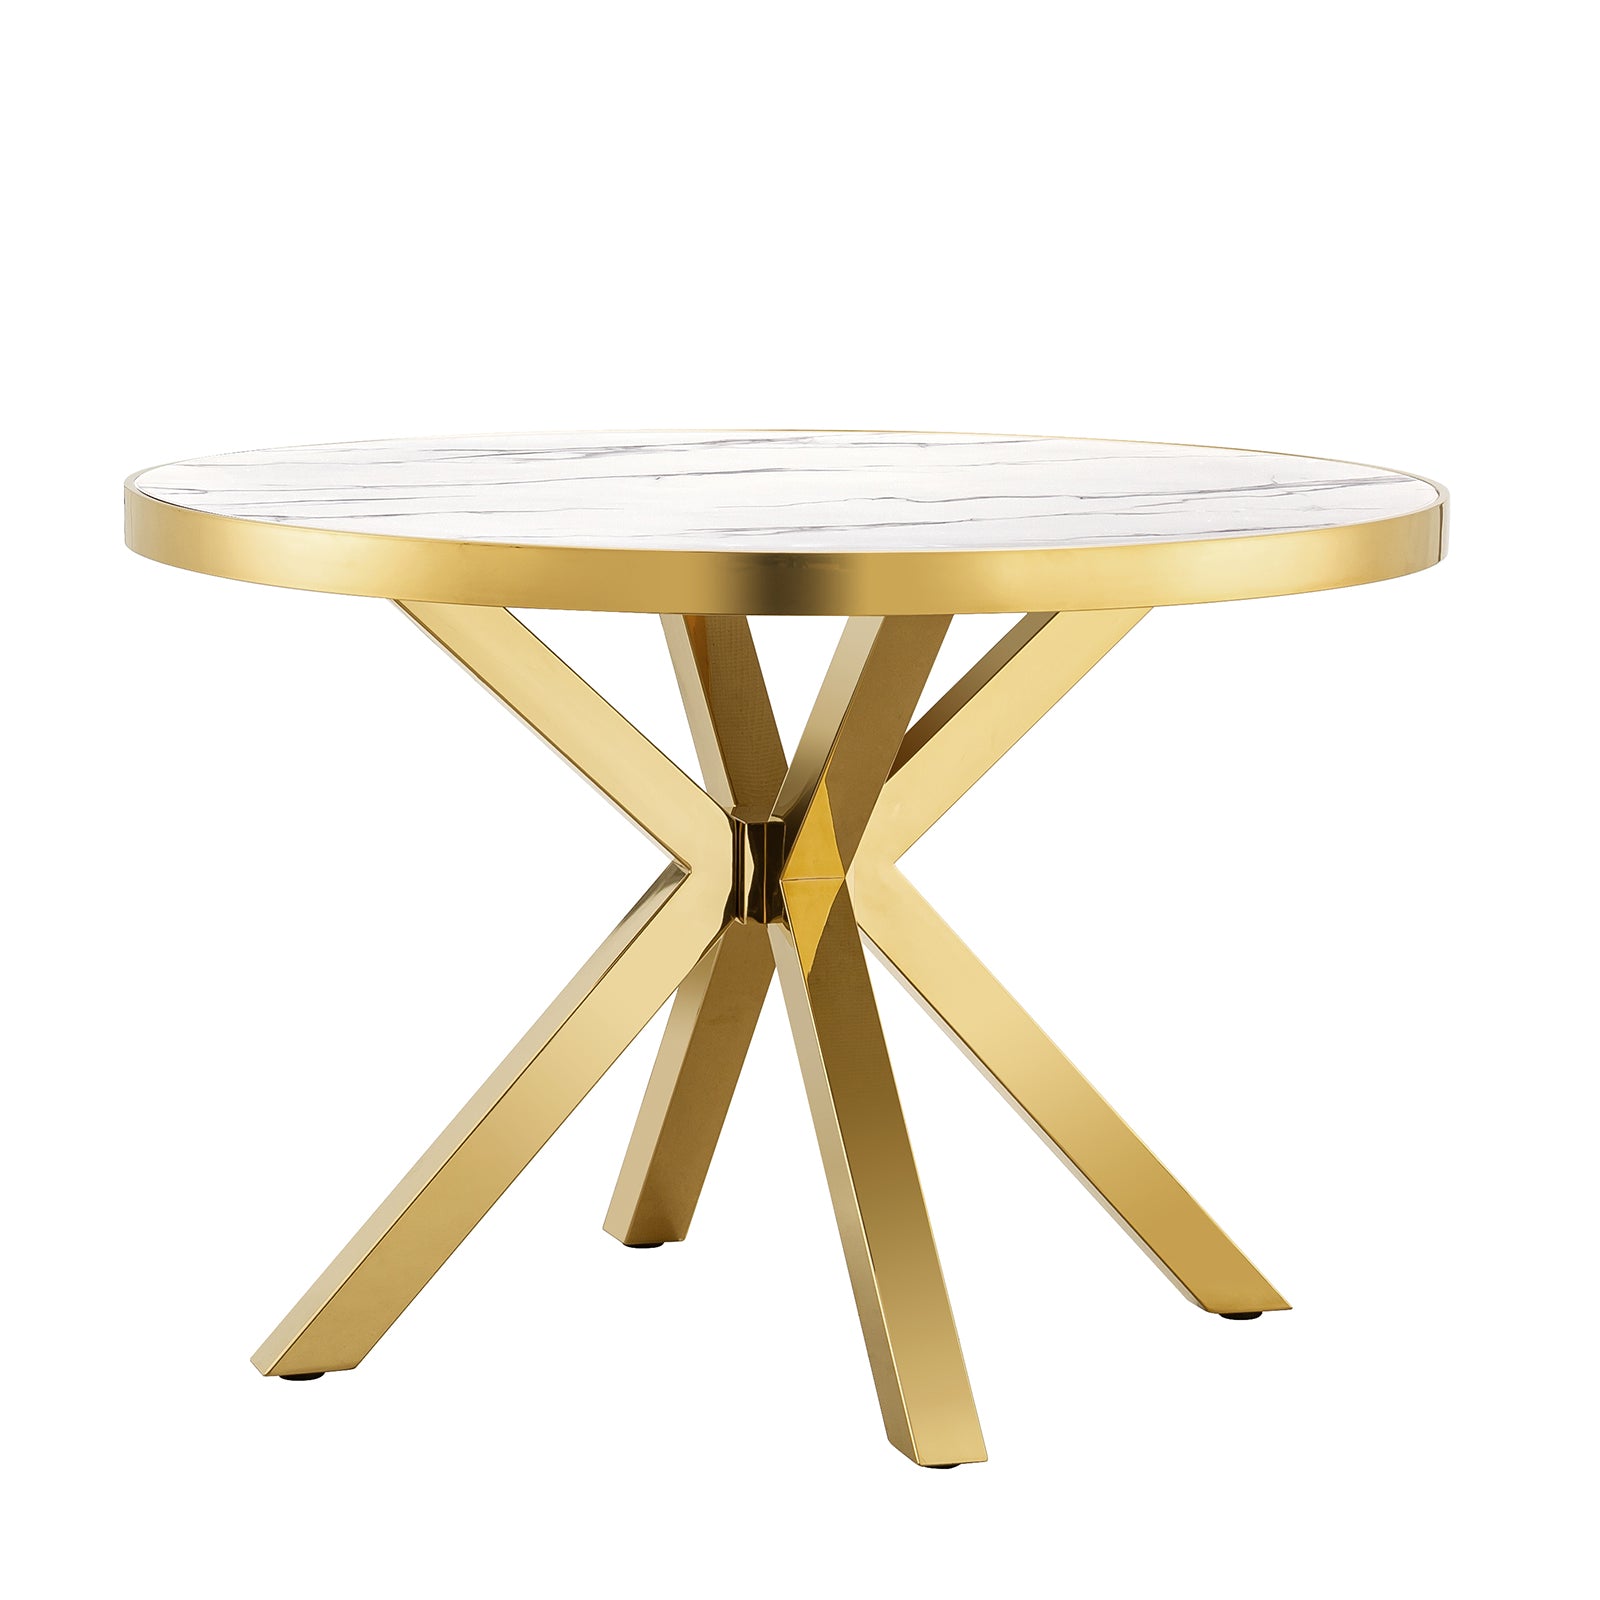 Captivating Elegance: The White and Gold Round Table